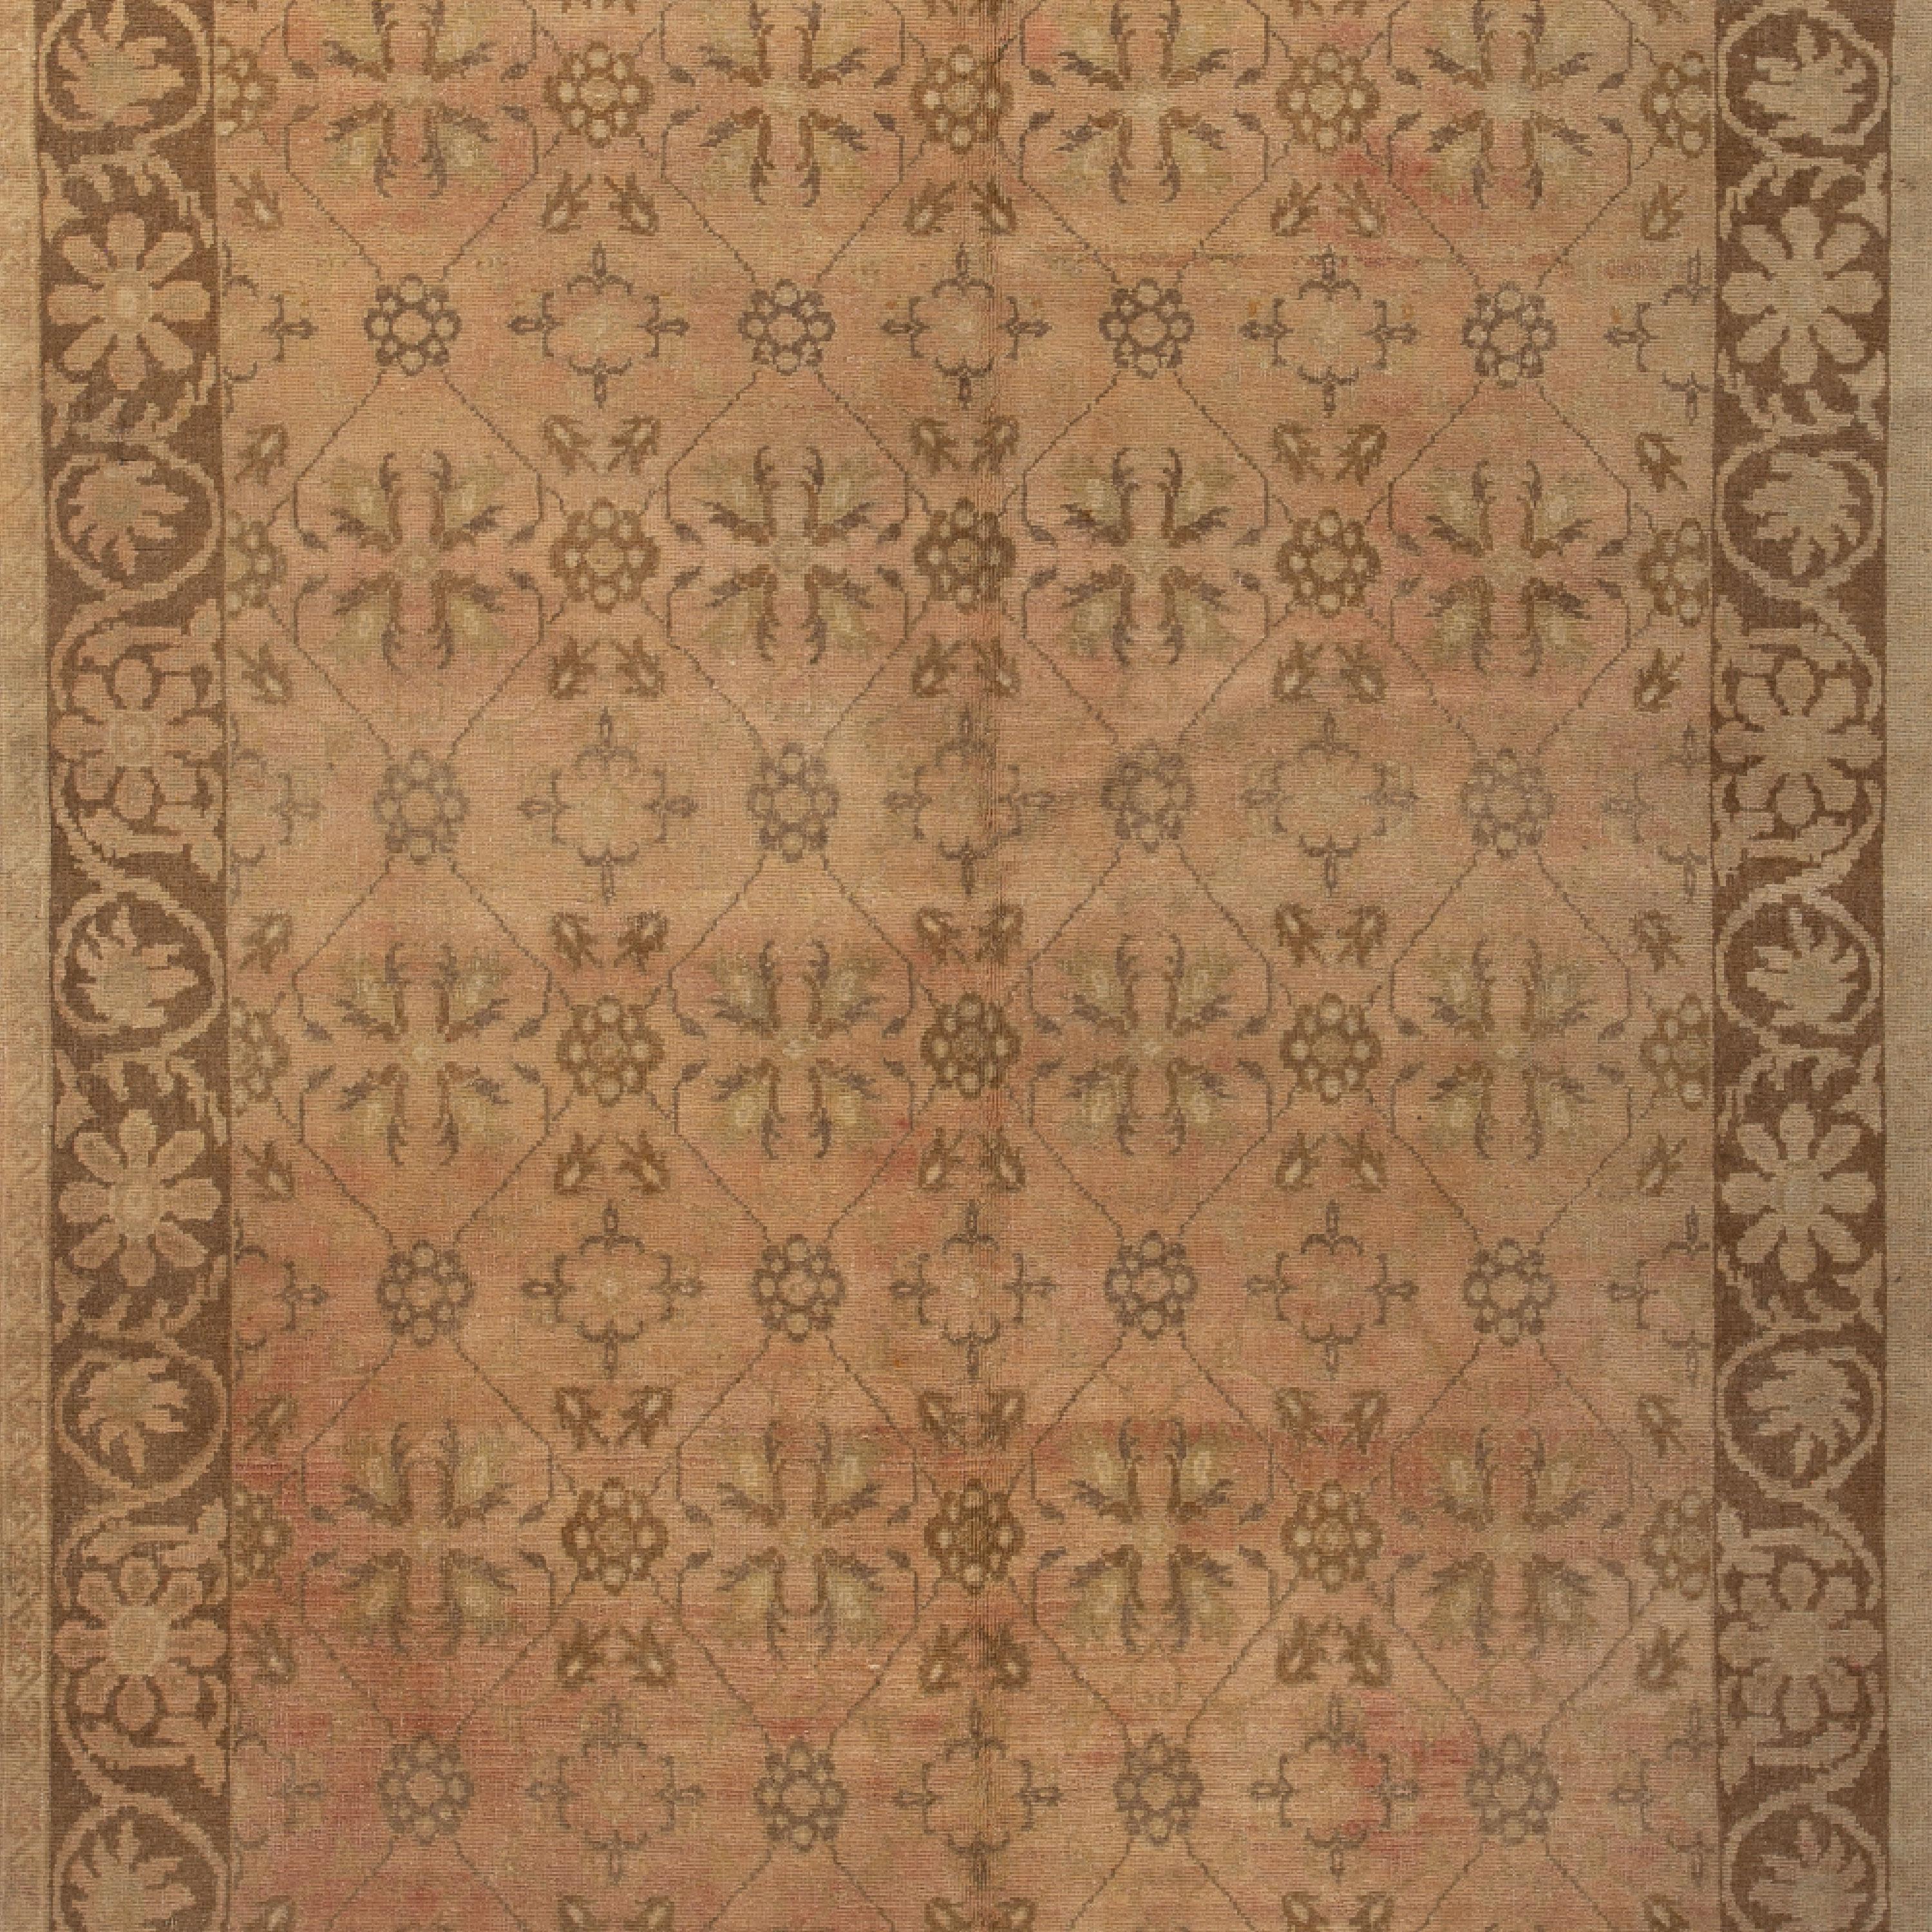 Hand-knotted in Turkey, this Vintage Fresco Rug - 4'10